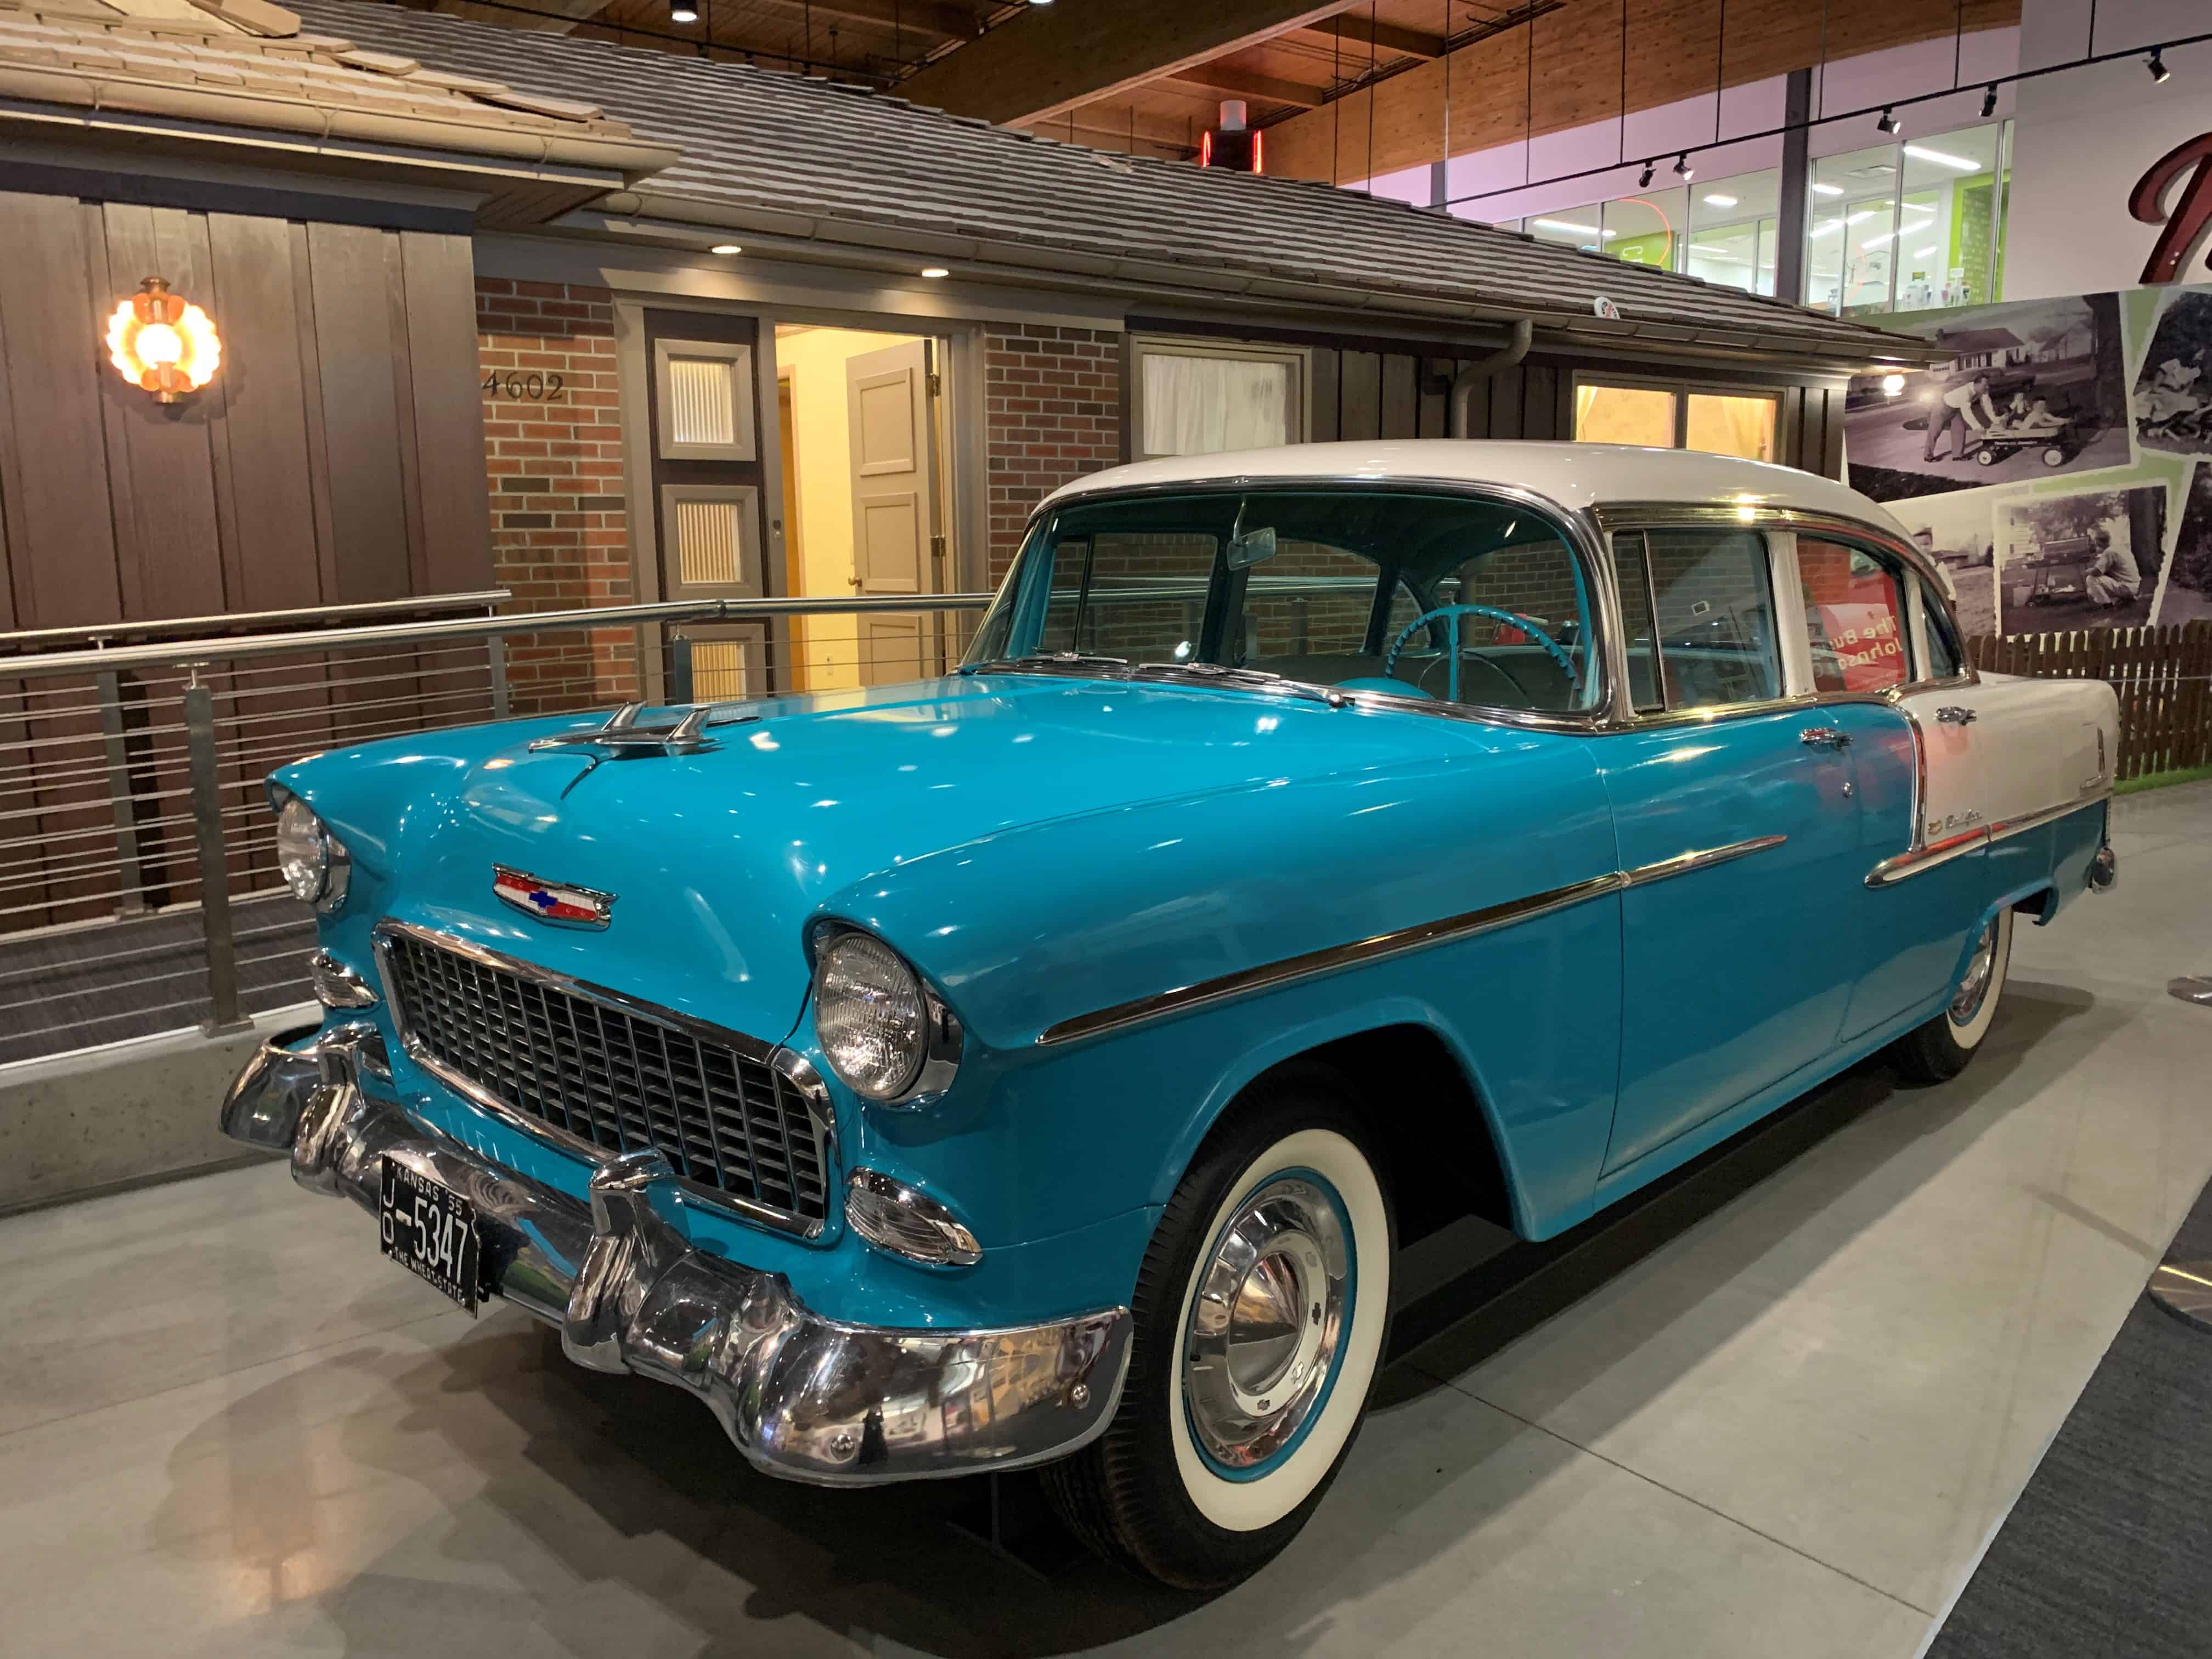 The Johnson County Museum includes a 1950's suburban home complete with a beautiful 50's Chevy sedan.